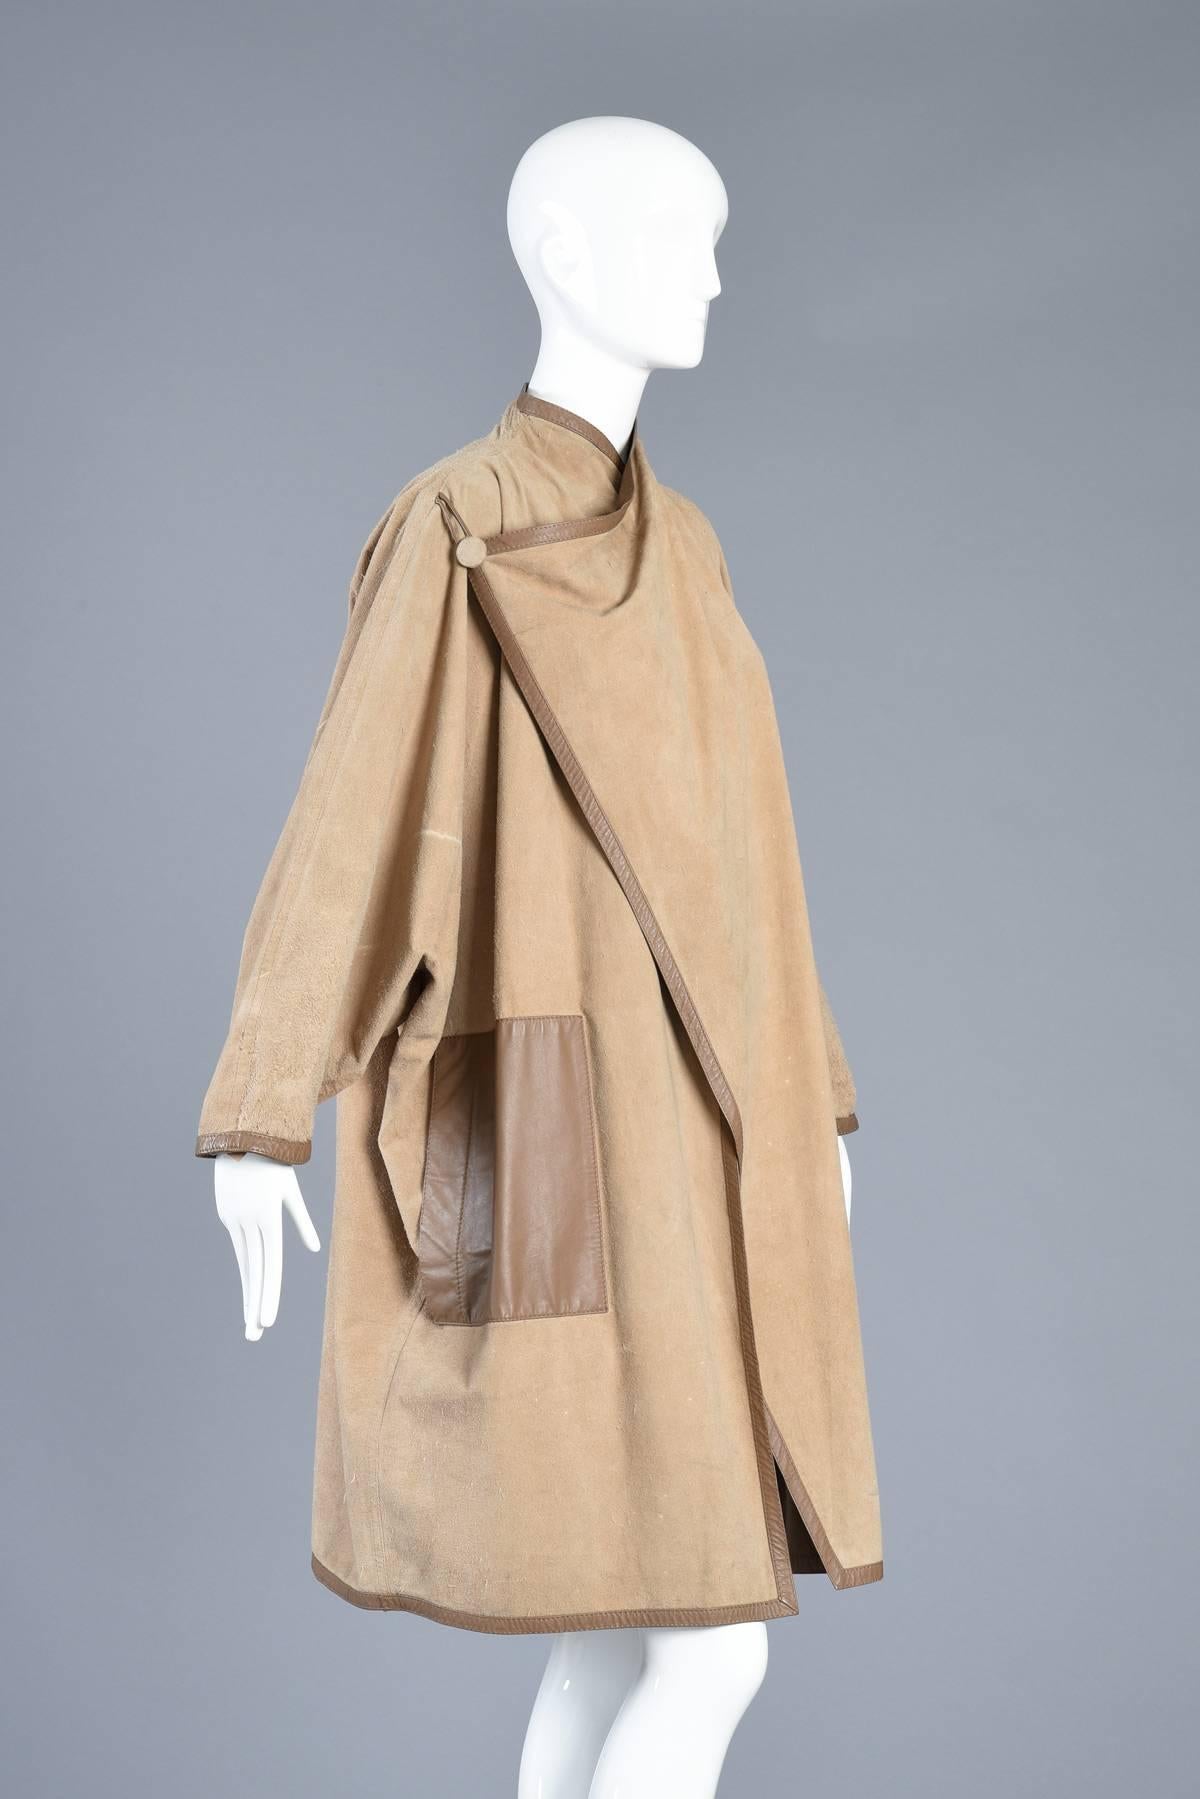 Incredible 1980s Reversible Suede Leather Avant Garde Draped Cape In Excellent Condition For Sale In Yucca Valley, CA